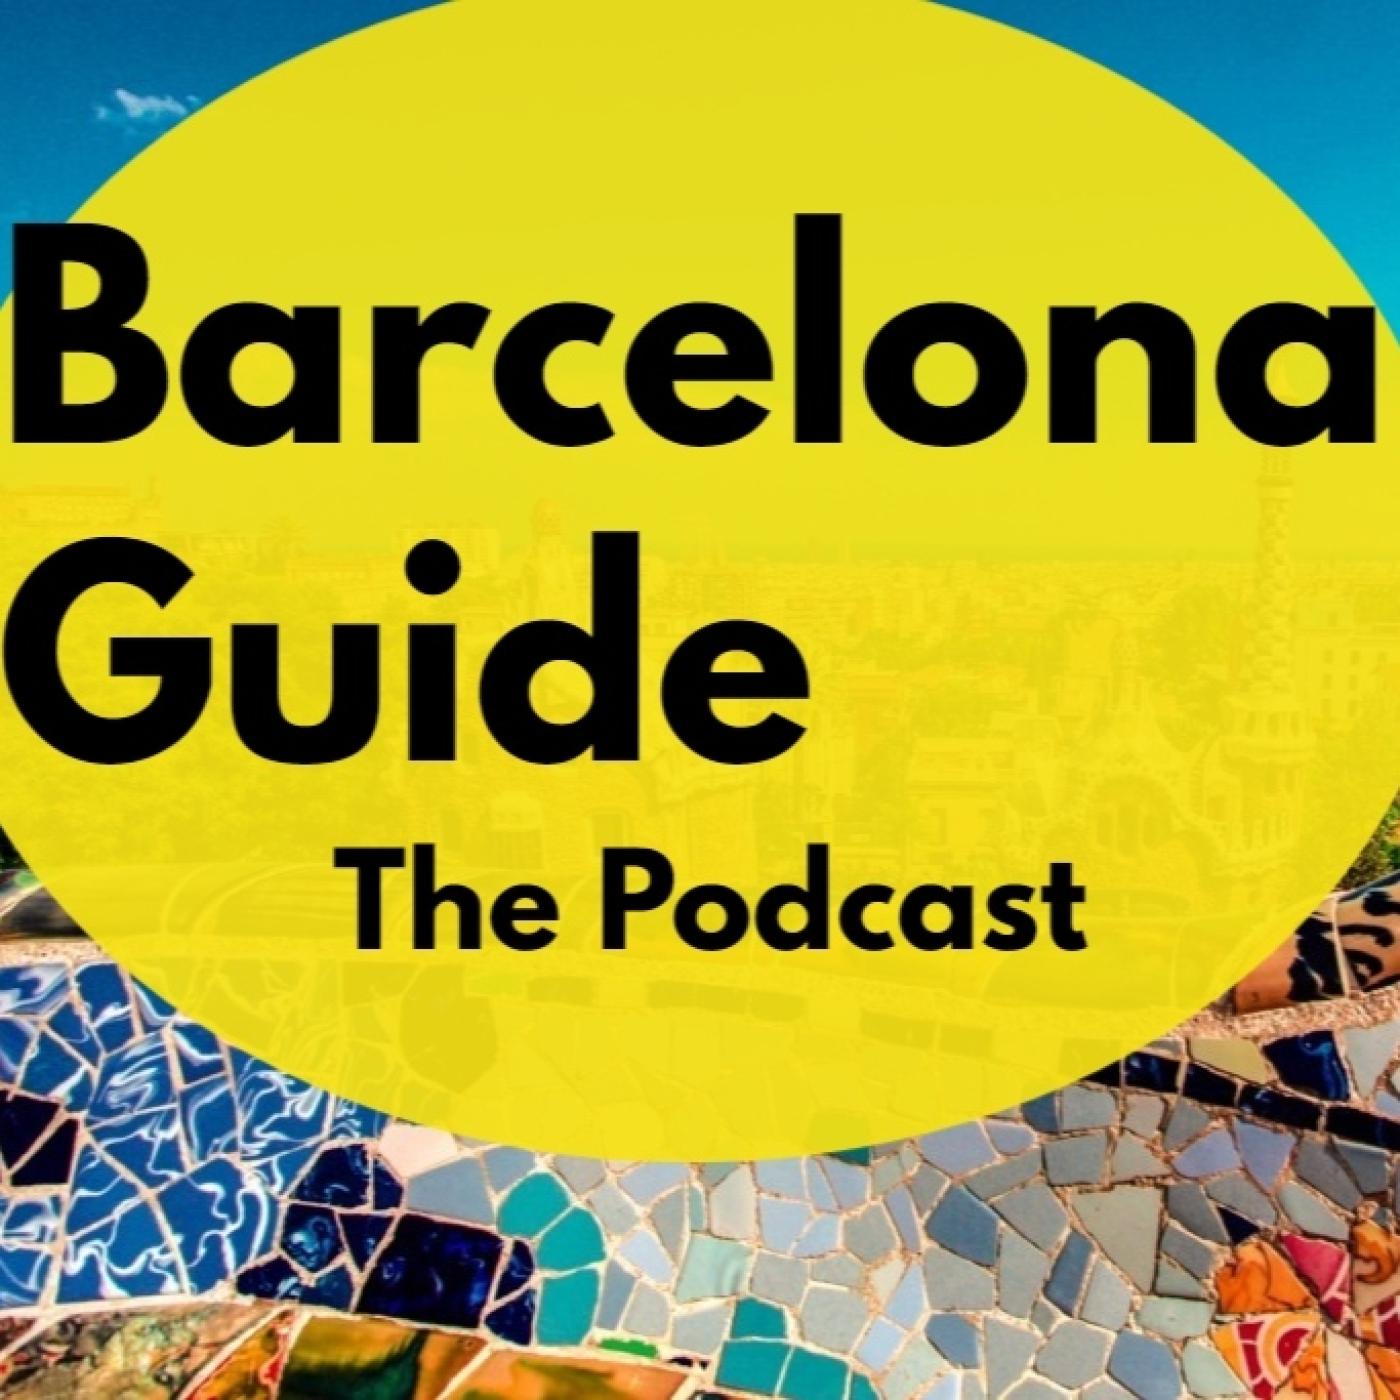 How to get to Barcelona from cruise port - Barcelona Guide (podcast ...